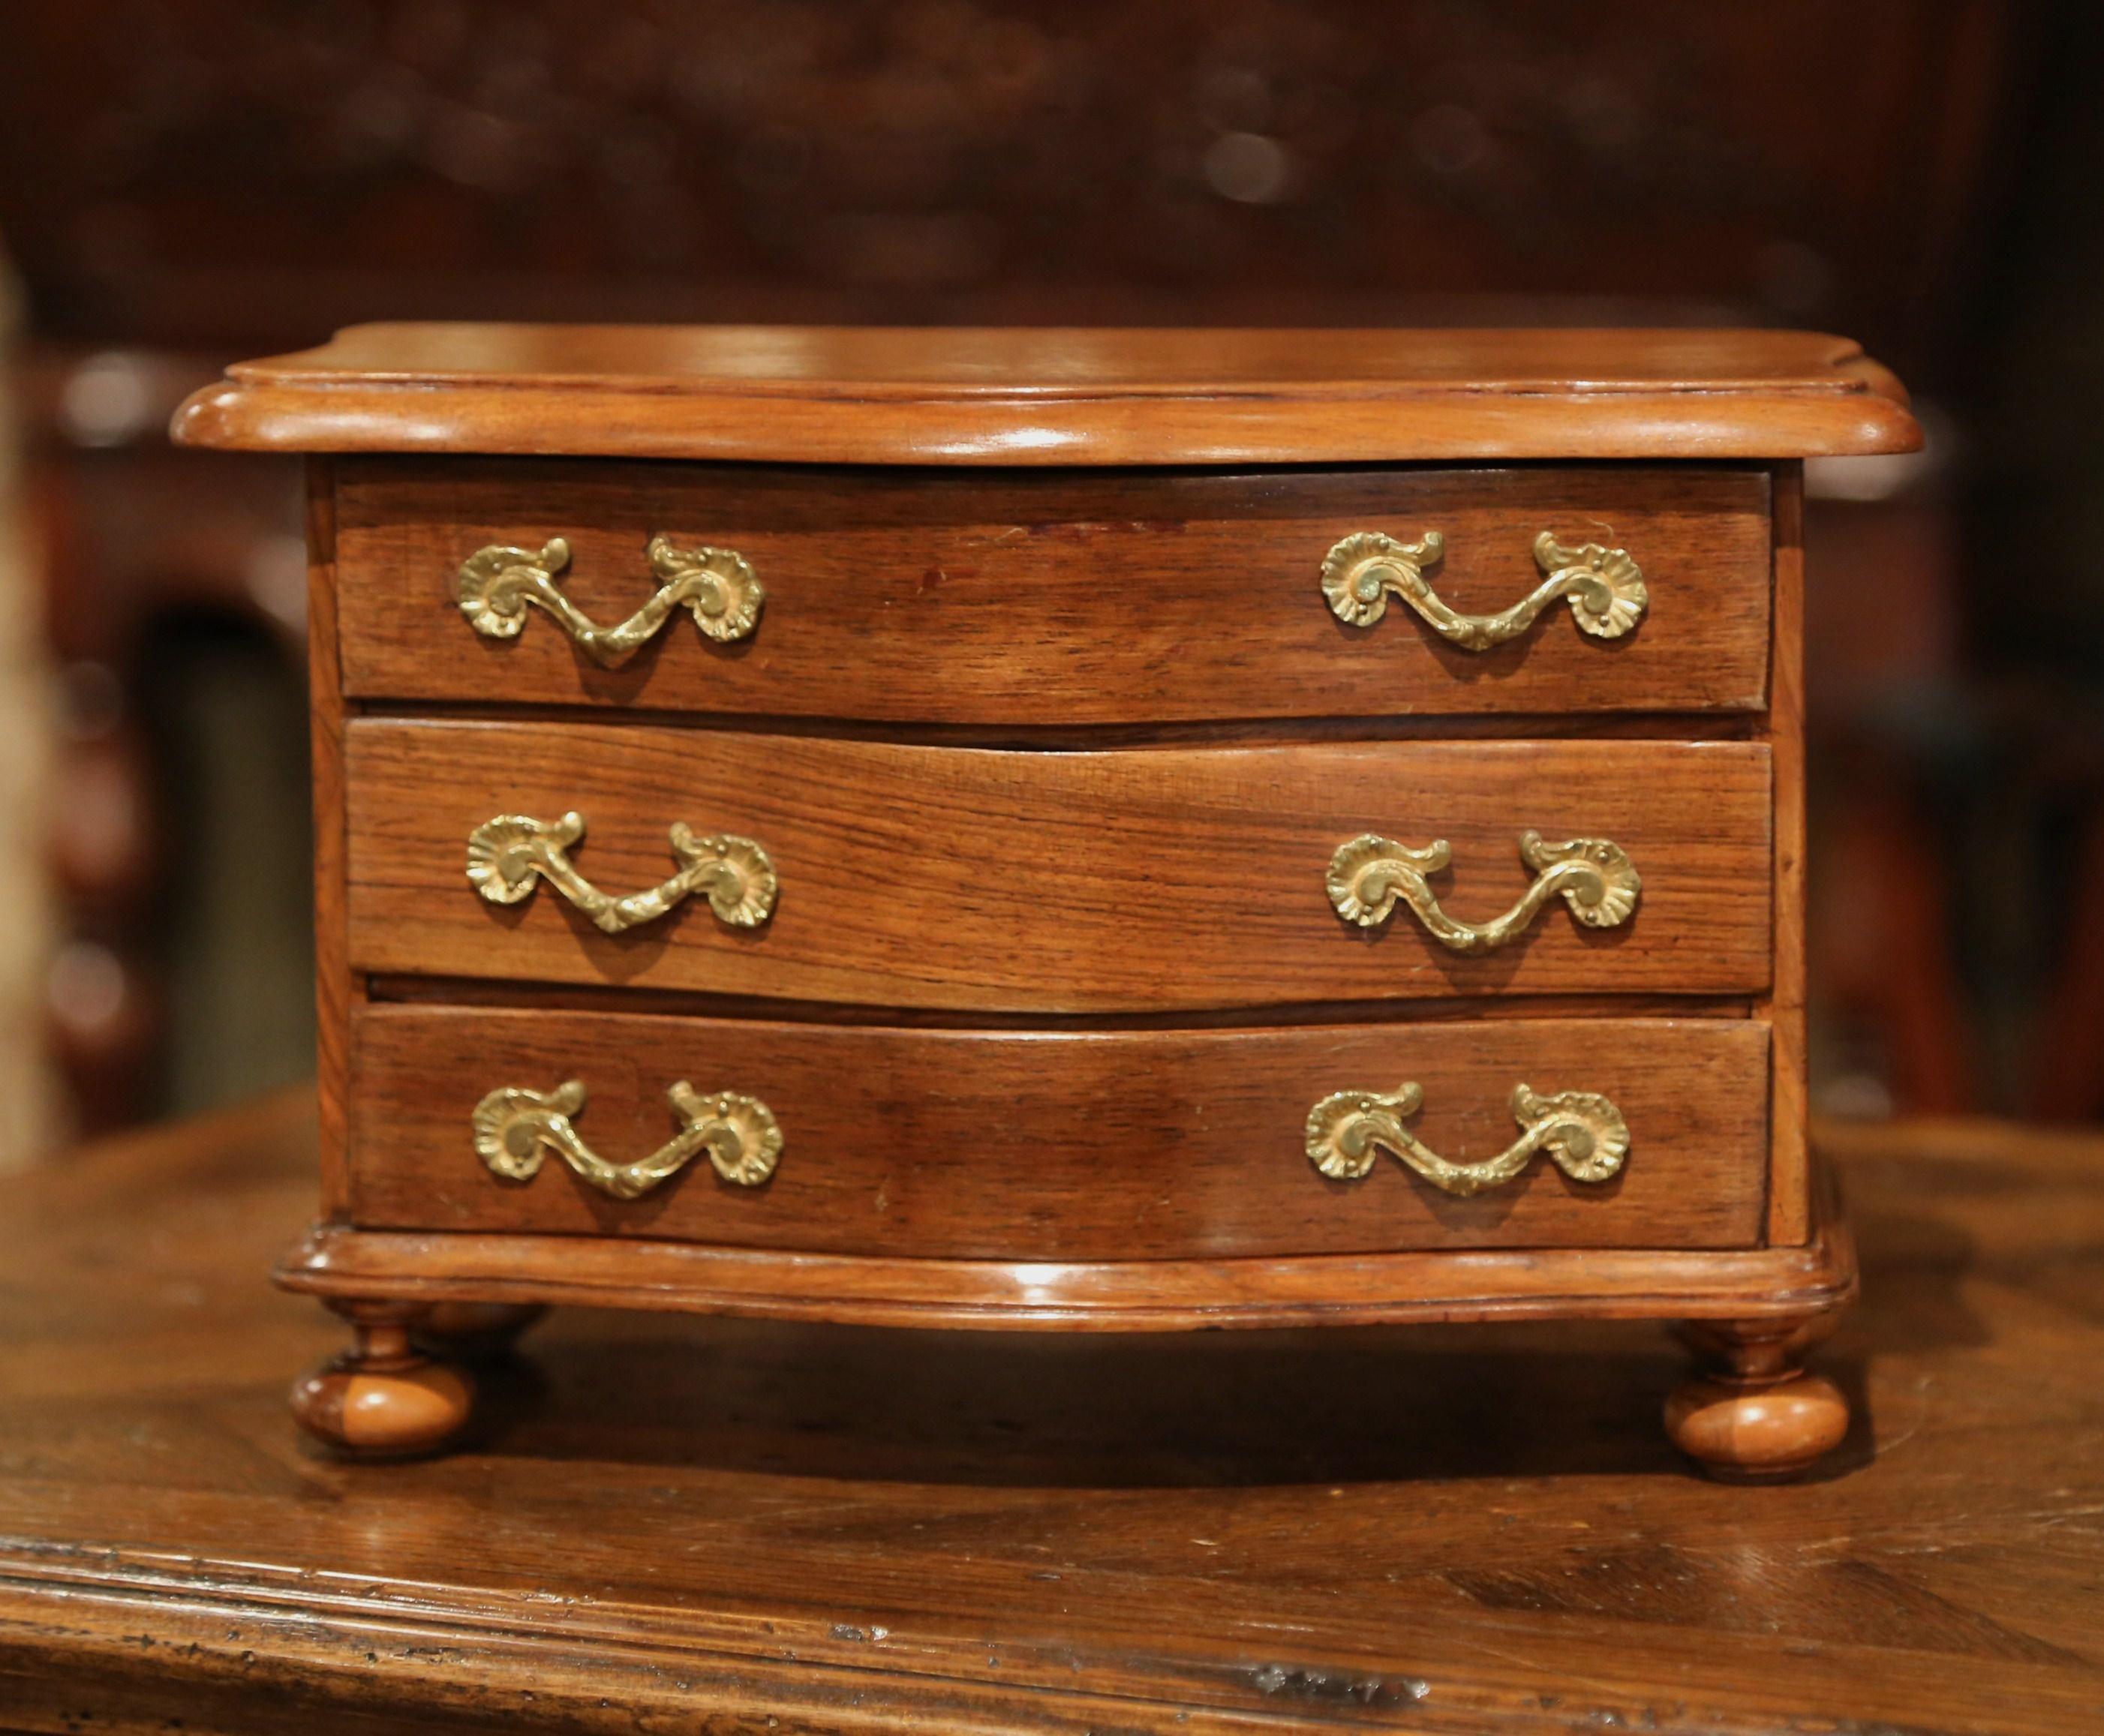 Decorate a master bathroom counter with this miniature chest of drawers. Crafted in France, circa 1920, the petite fruitwood 